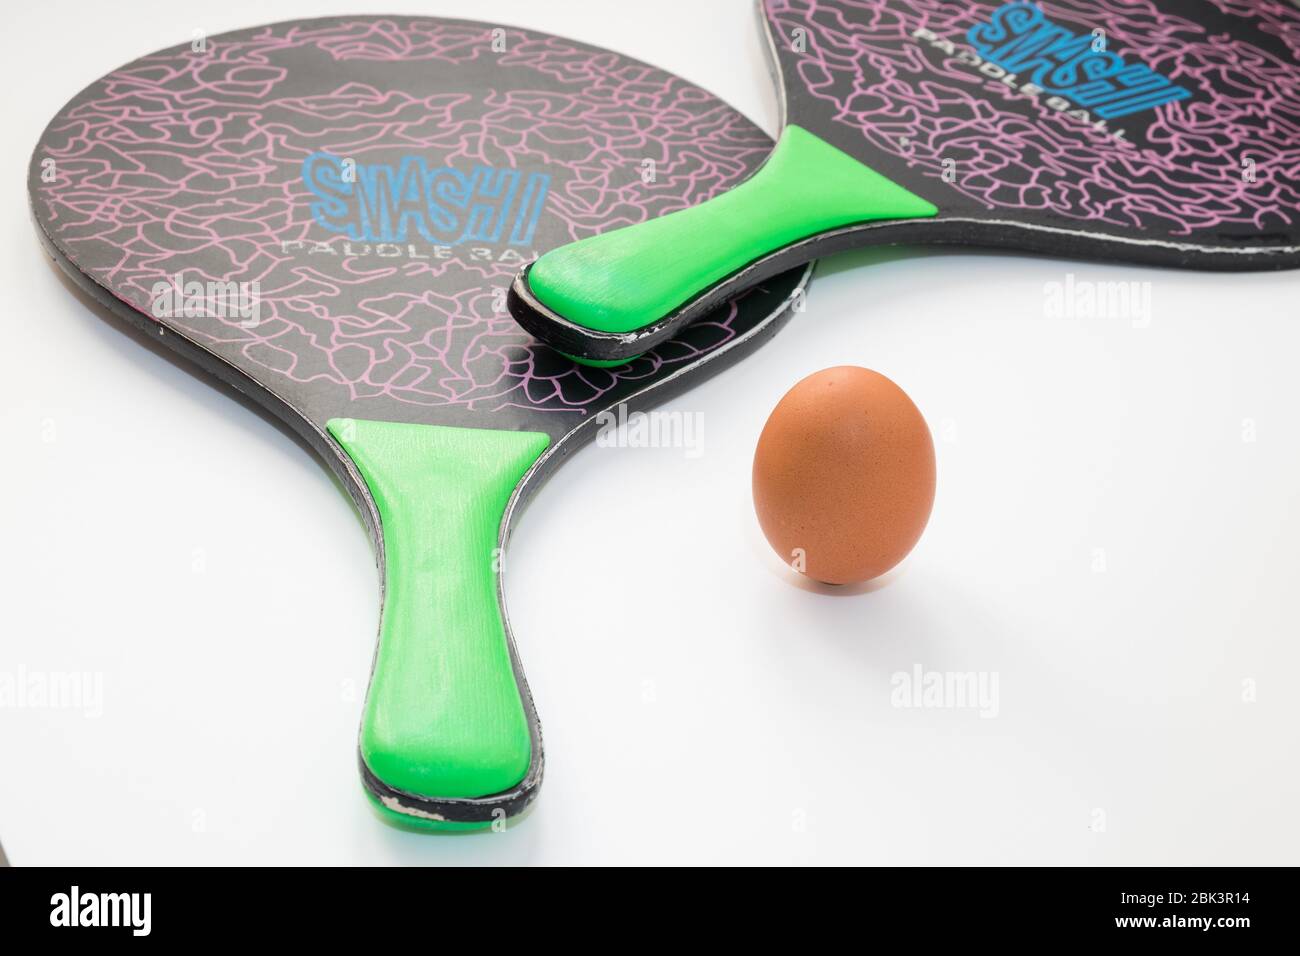 An egg is resting and replaces the ball in the middle between two beach tennis rackets on a white background, the composition expresses the concept of Stock Photo